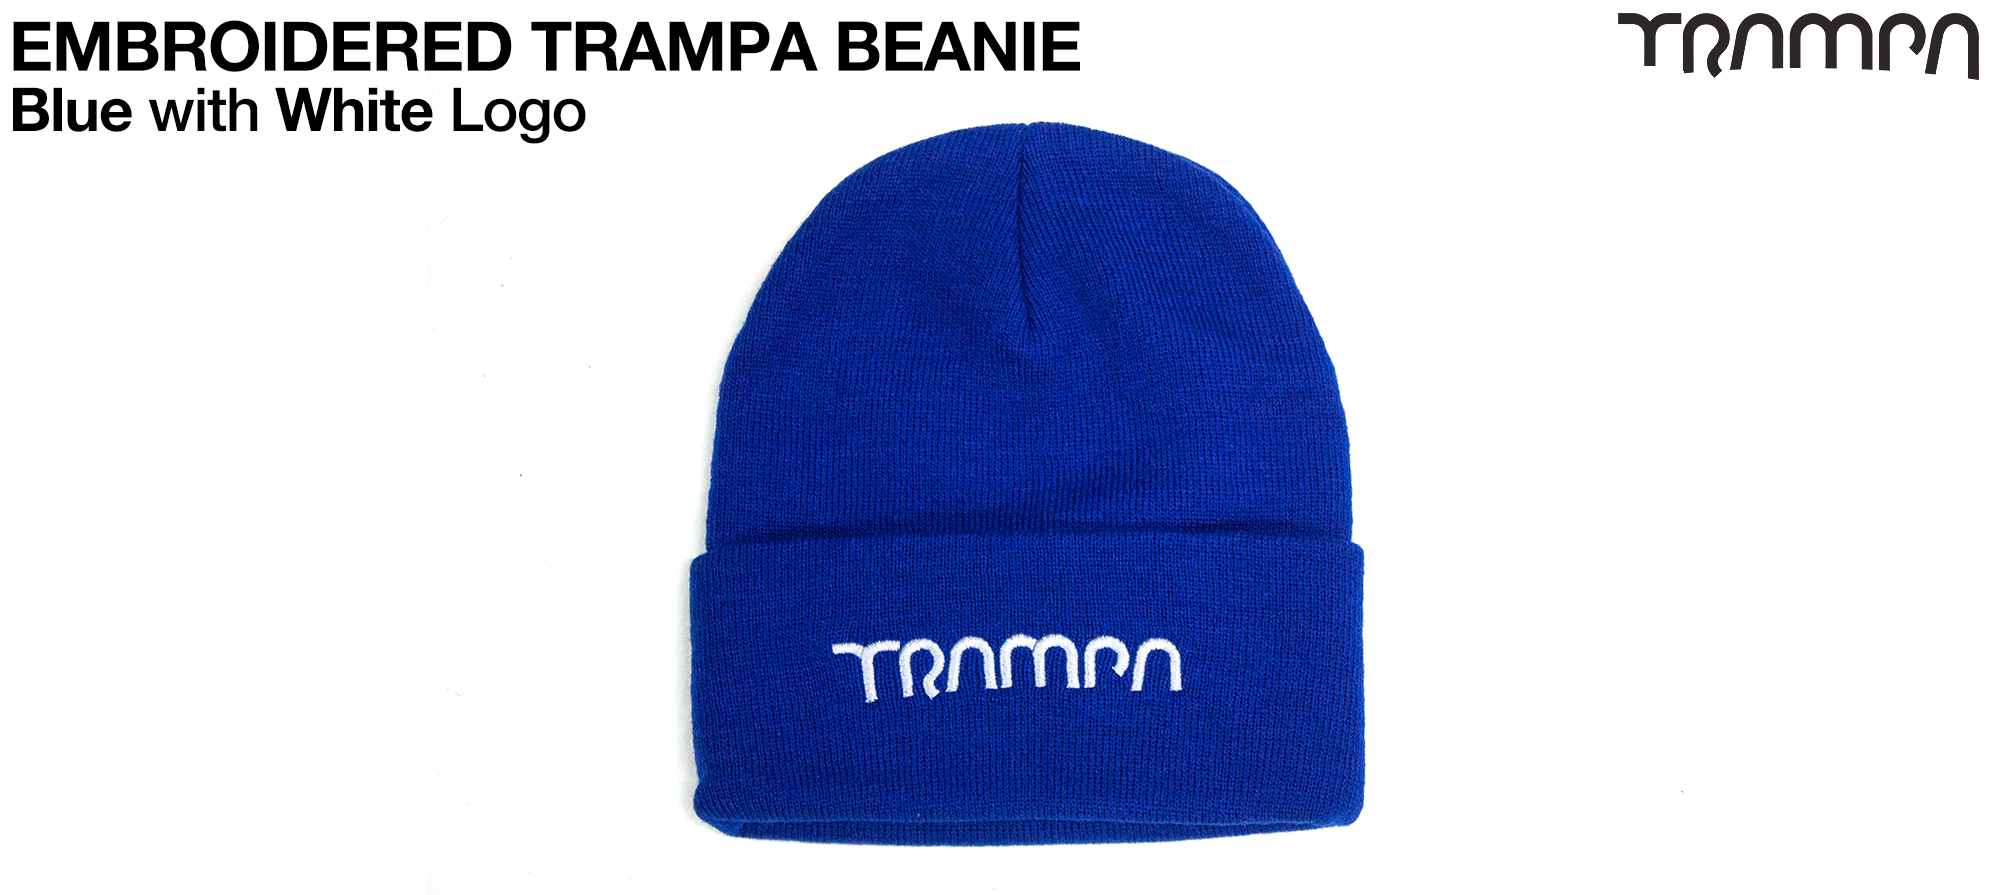 OXFORD BLUE Beanie with WHITE TRAMPA Embroidery - Double thick turn over for extra warmth